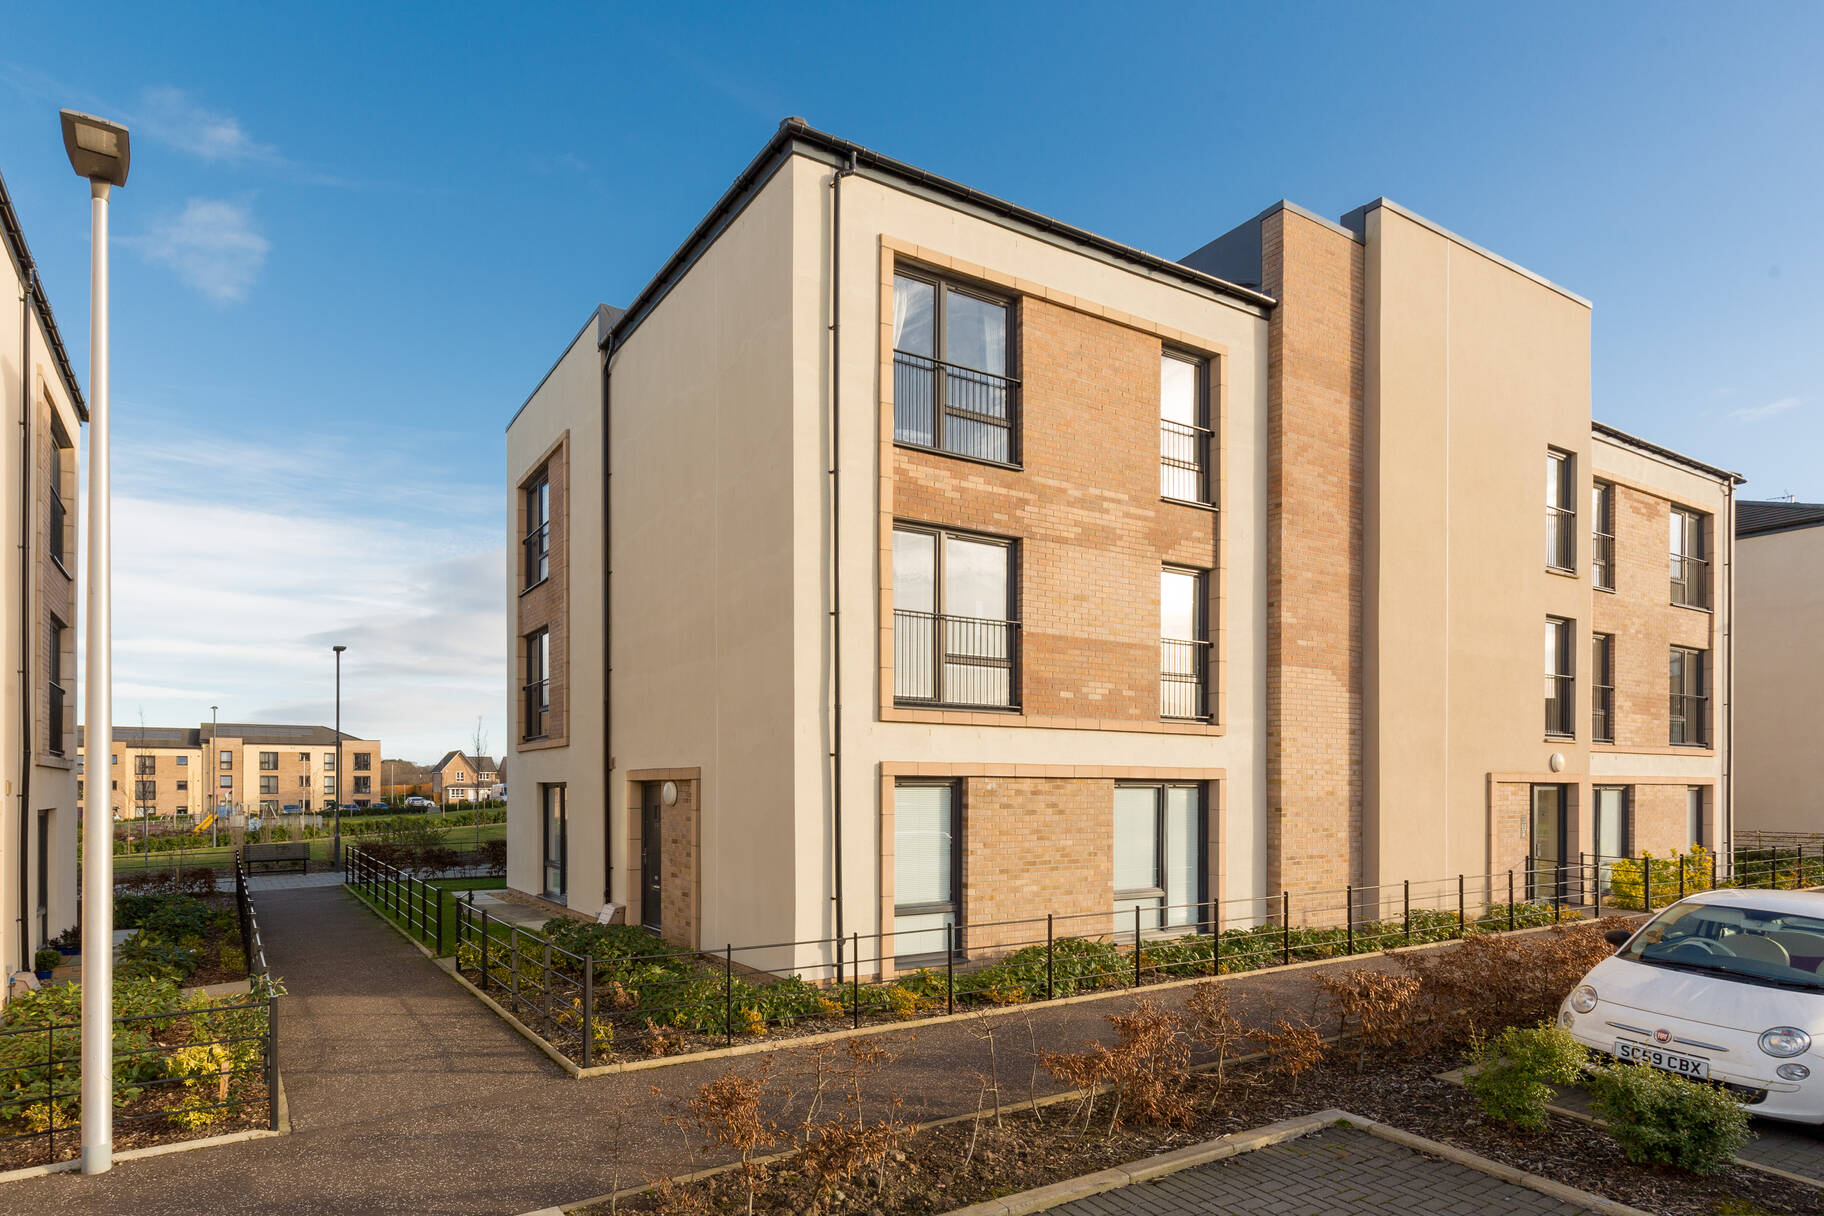 55/4 Lowrie Gait, South Queensferry, EH30 9AB